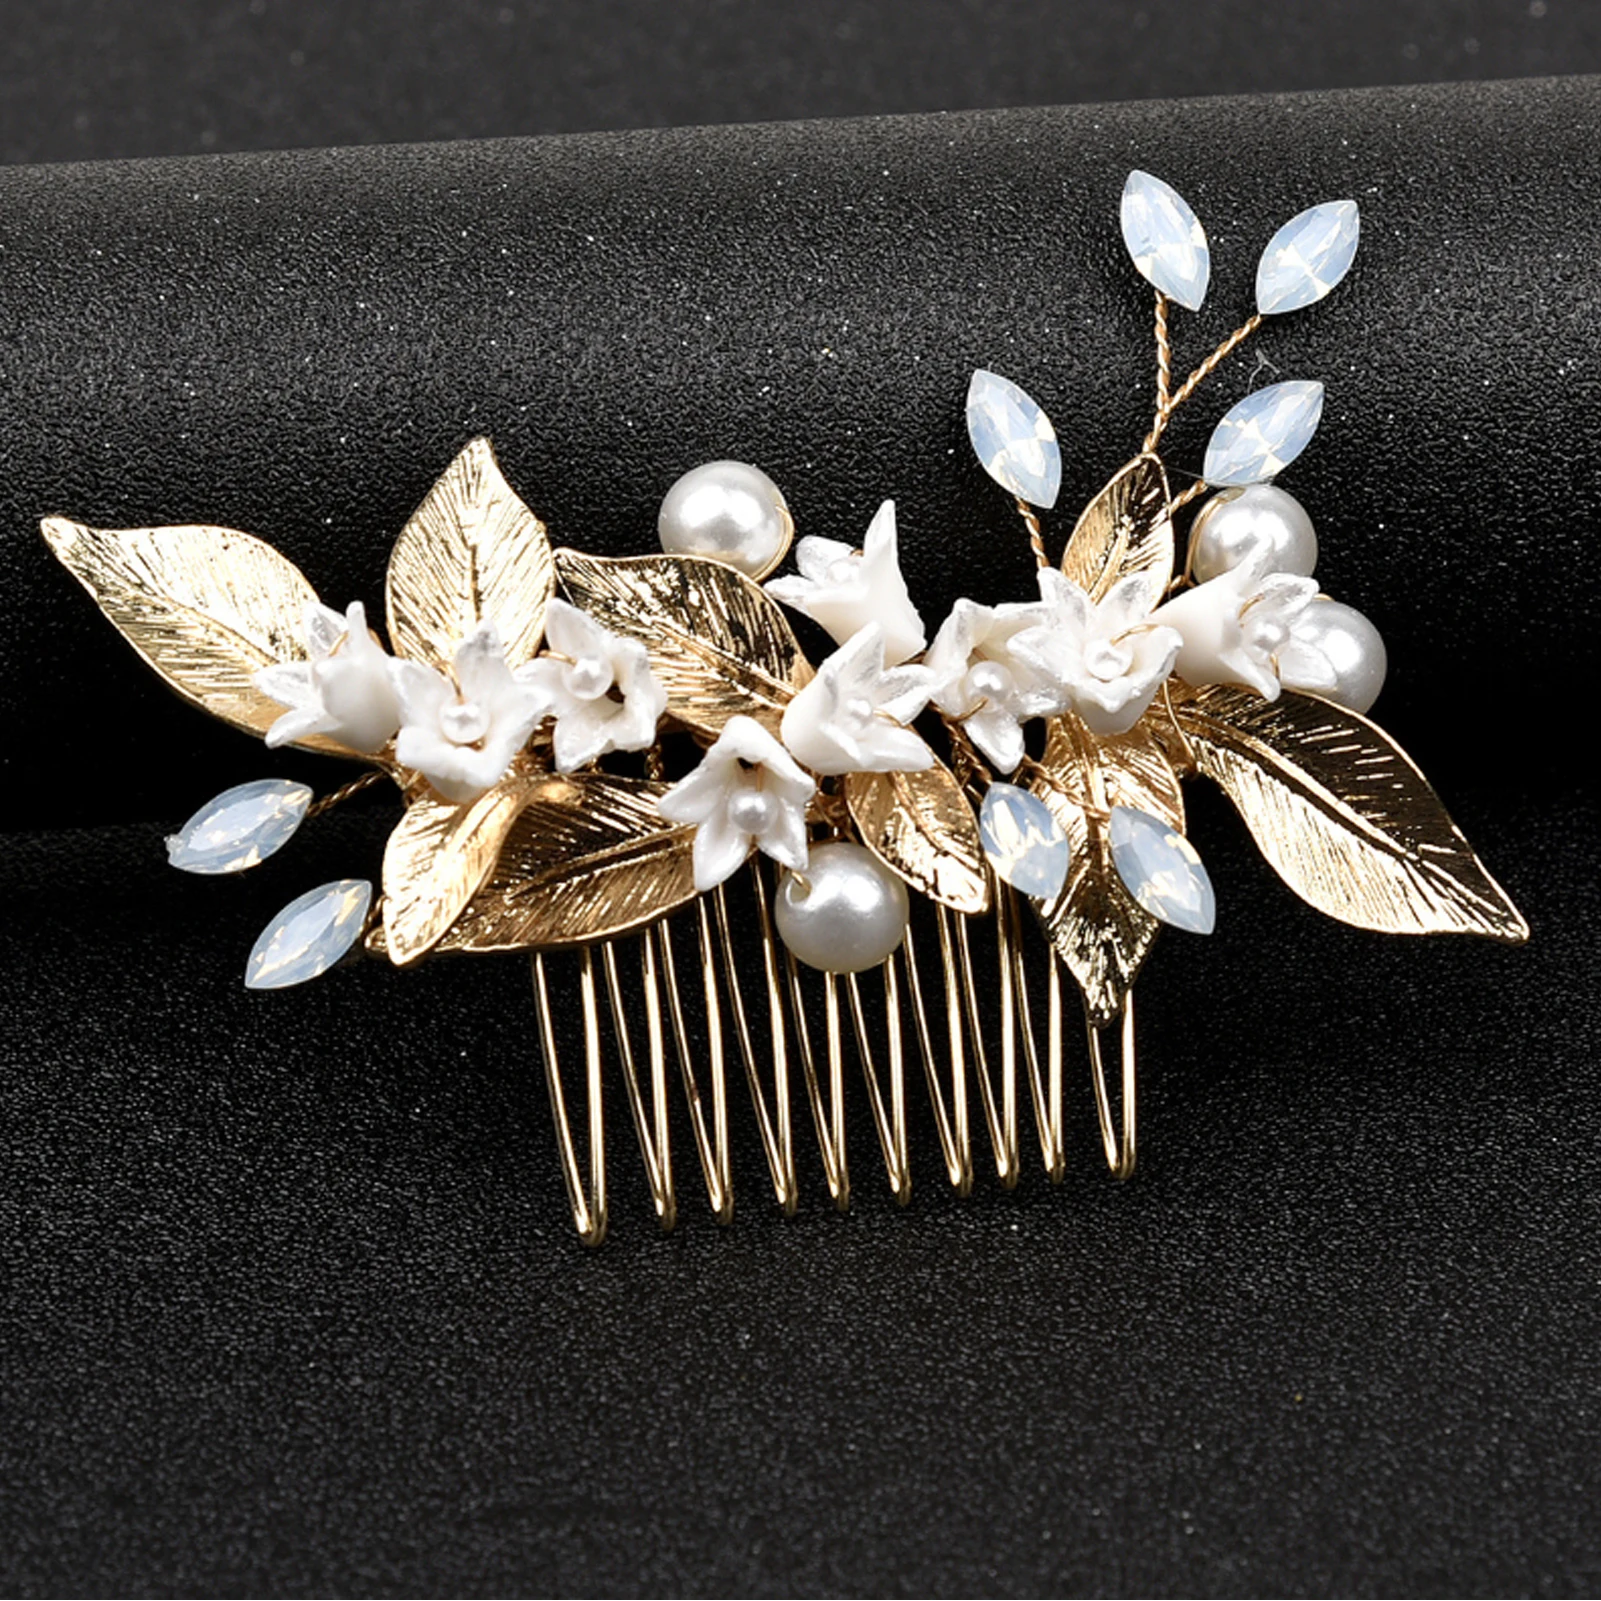 

Hair Combs Bridal Hair Clips Accessories Wedding Crystal Peals Jewelry Handmade Women Head Ornaments Headpieces For Bride ML